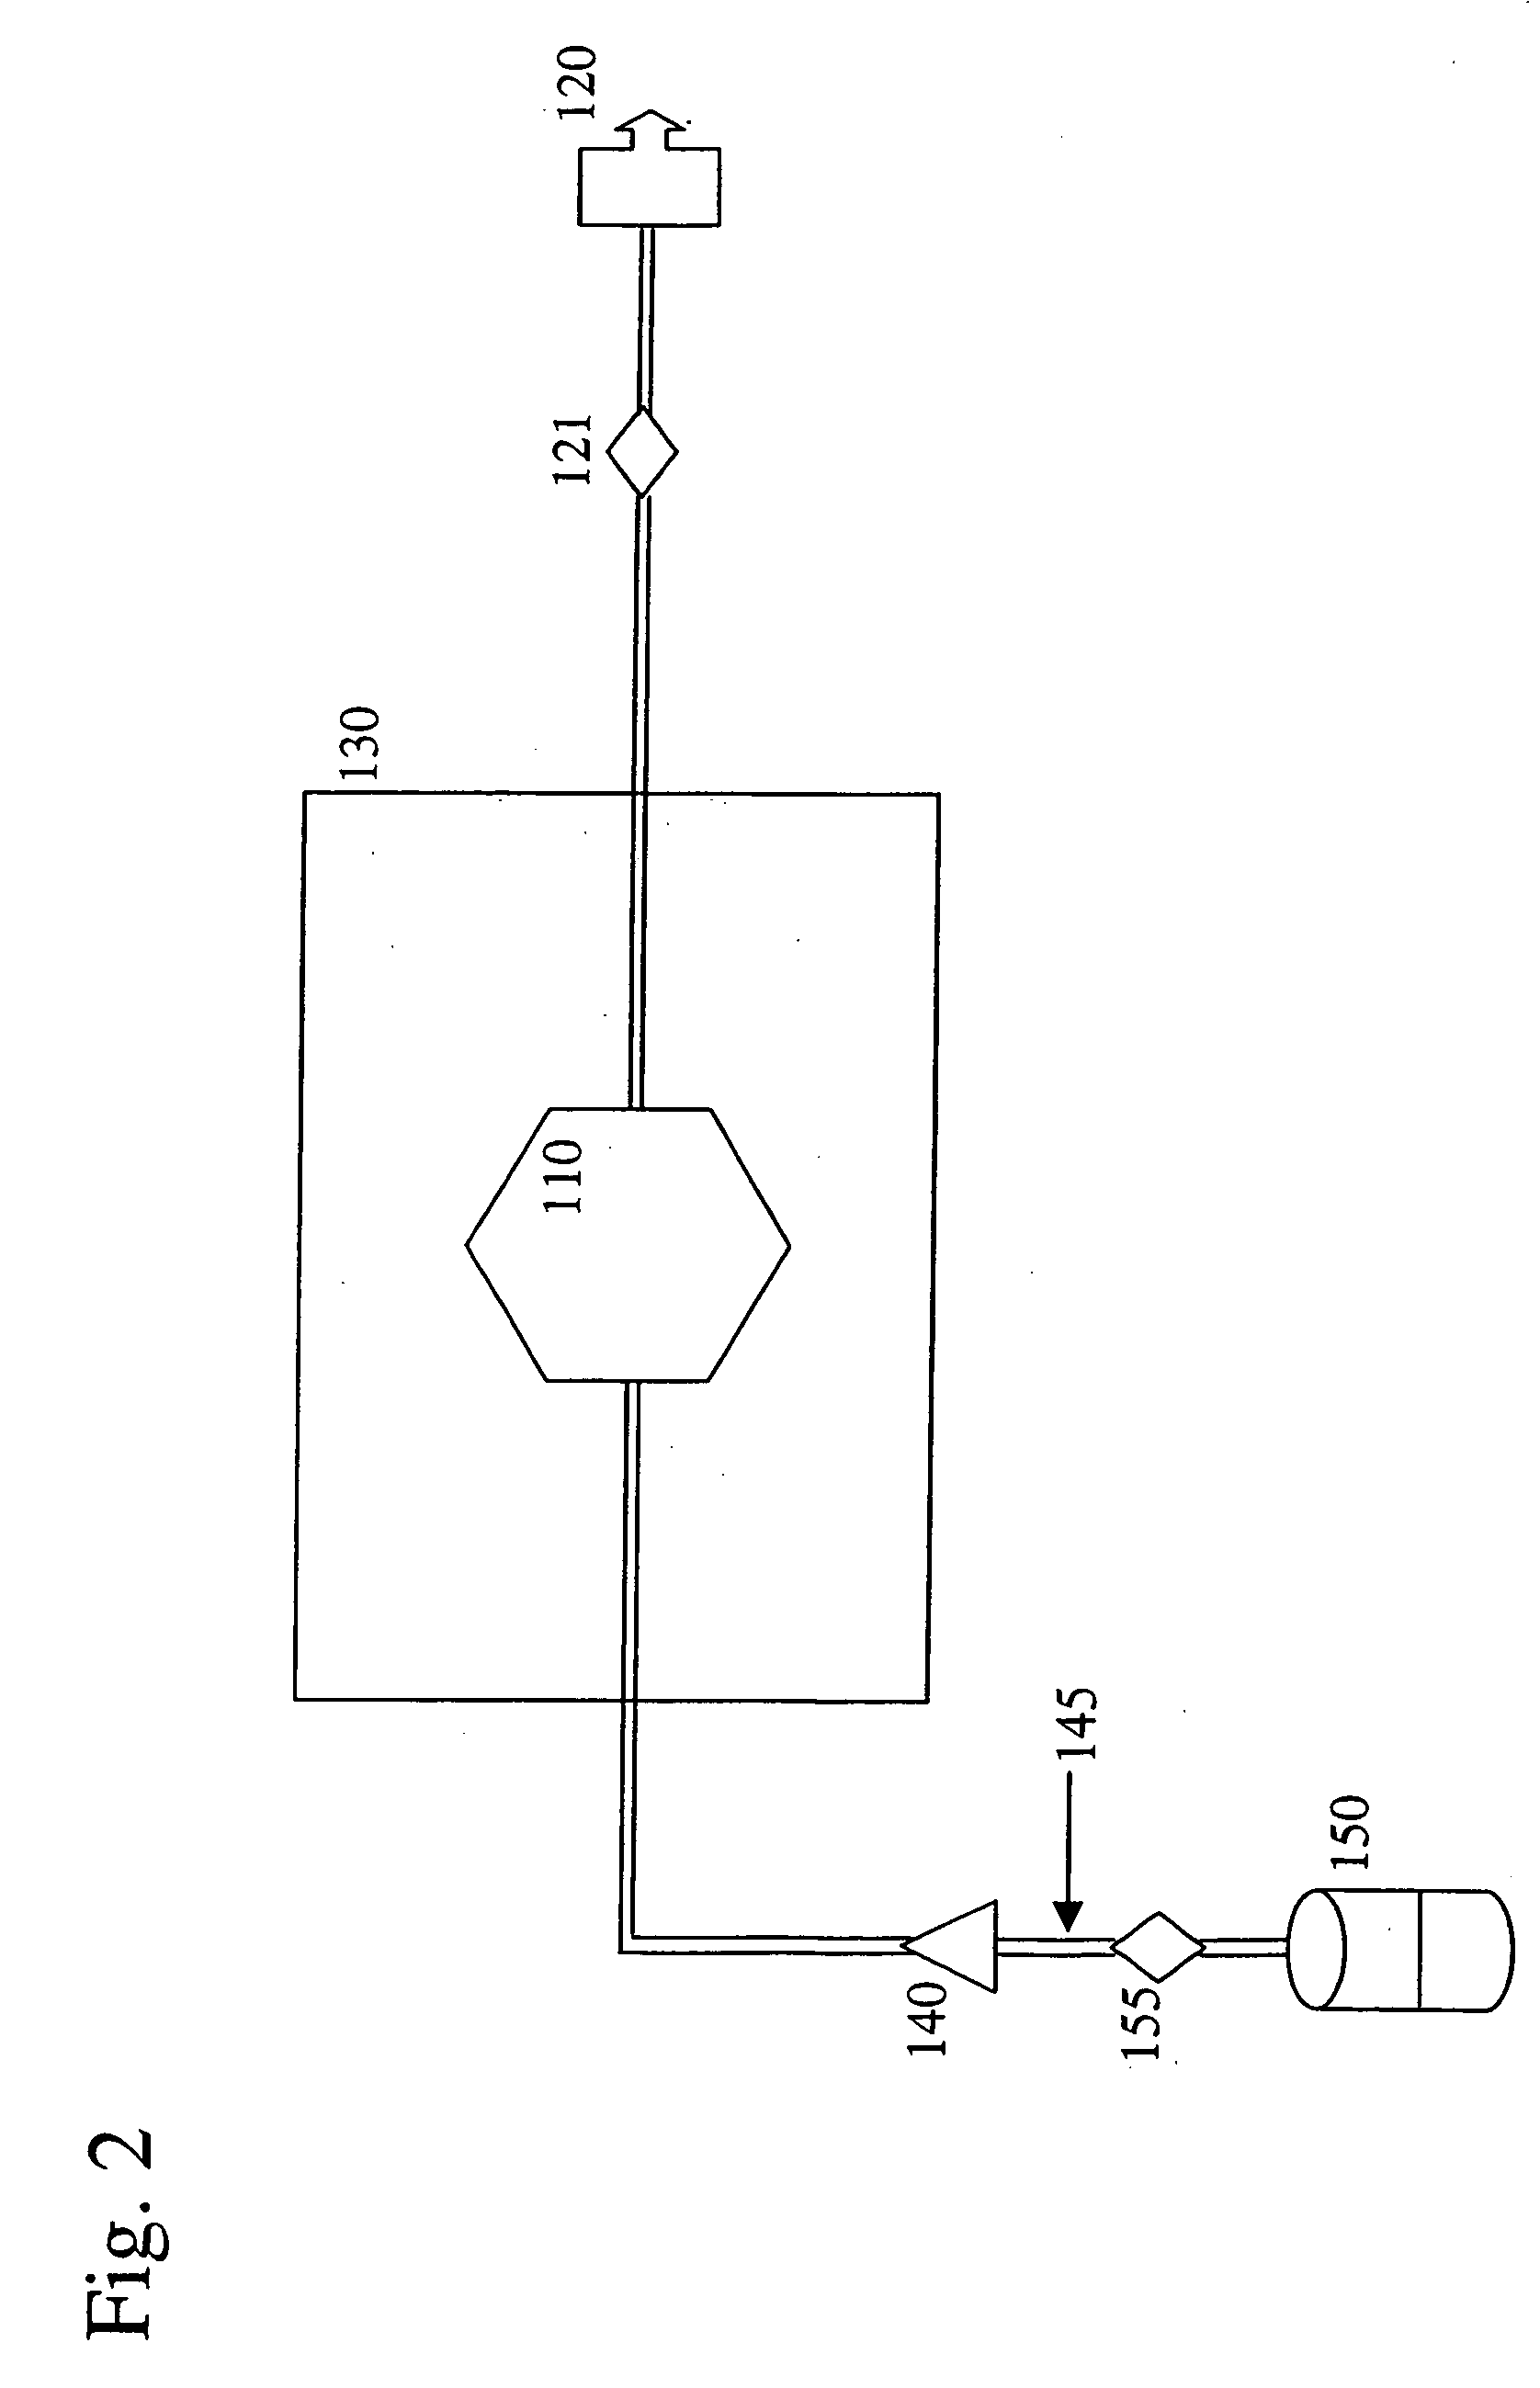 System for deposition of inert barrier coating to increase corrosion resistance